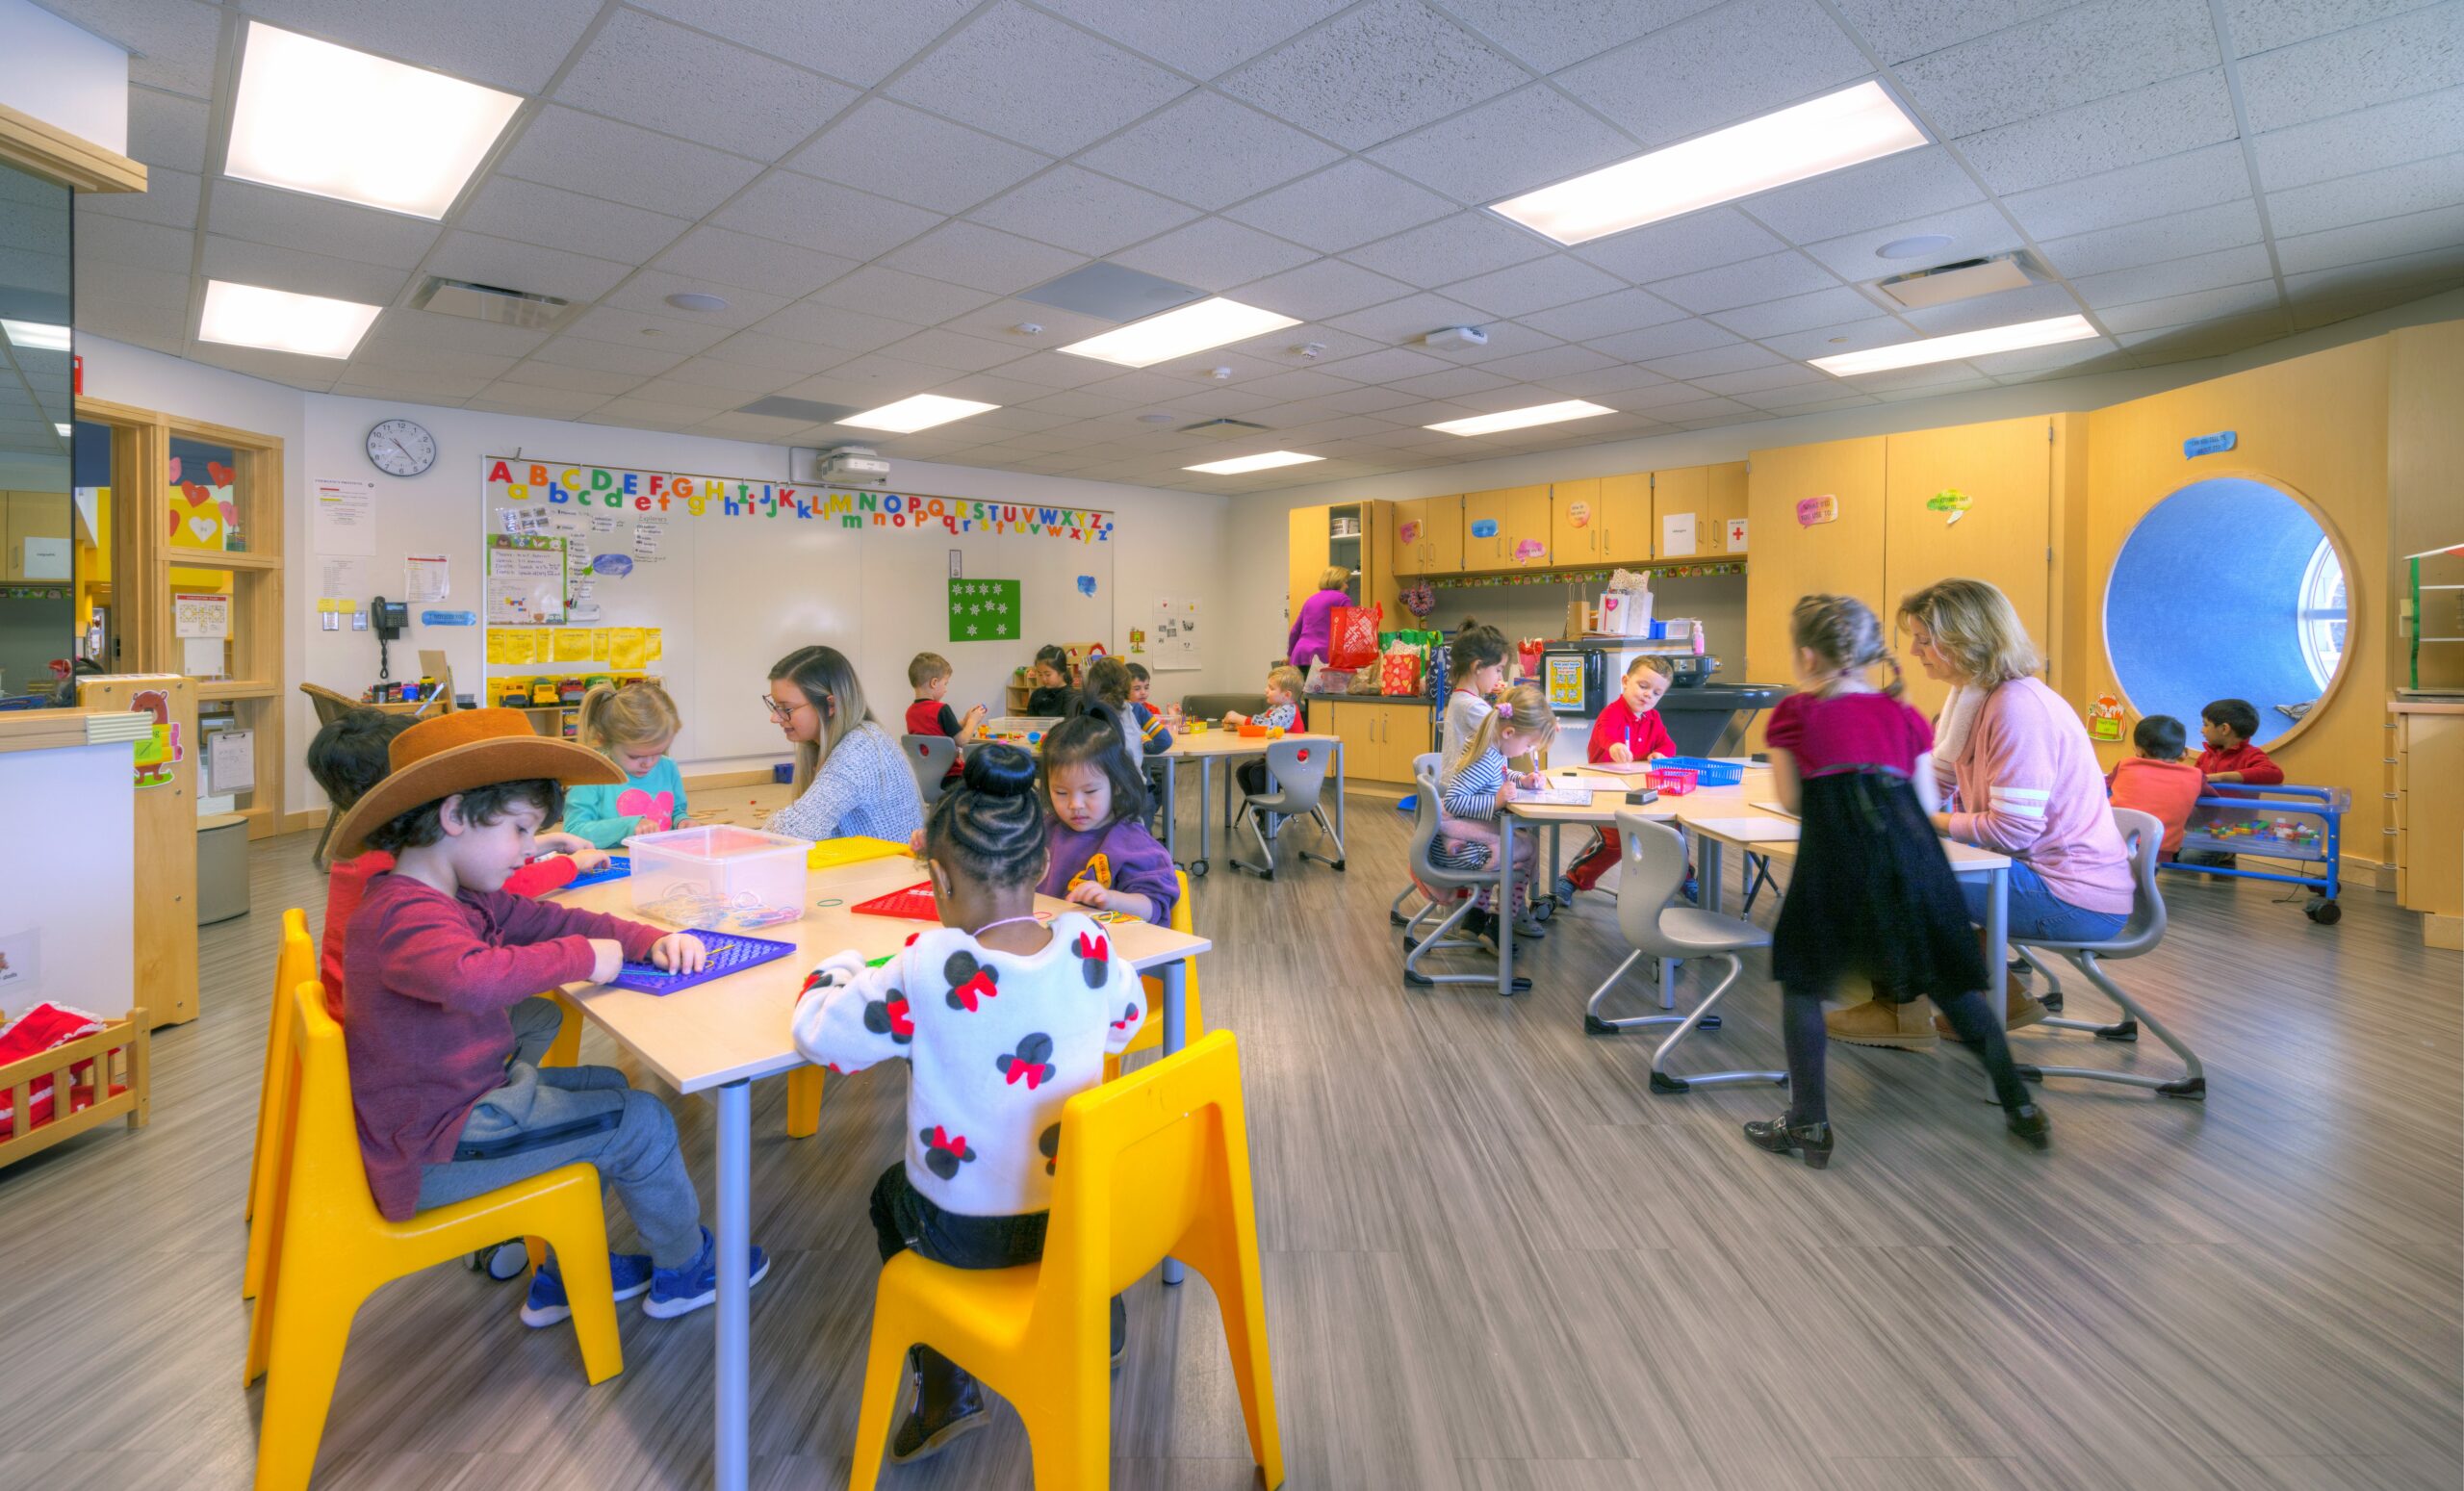 Barton Malow_Troy Early Childhood Center_Classroom2